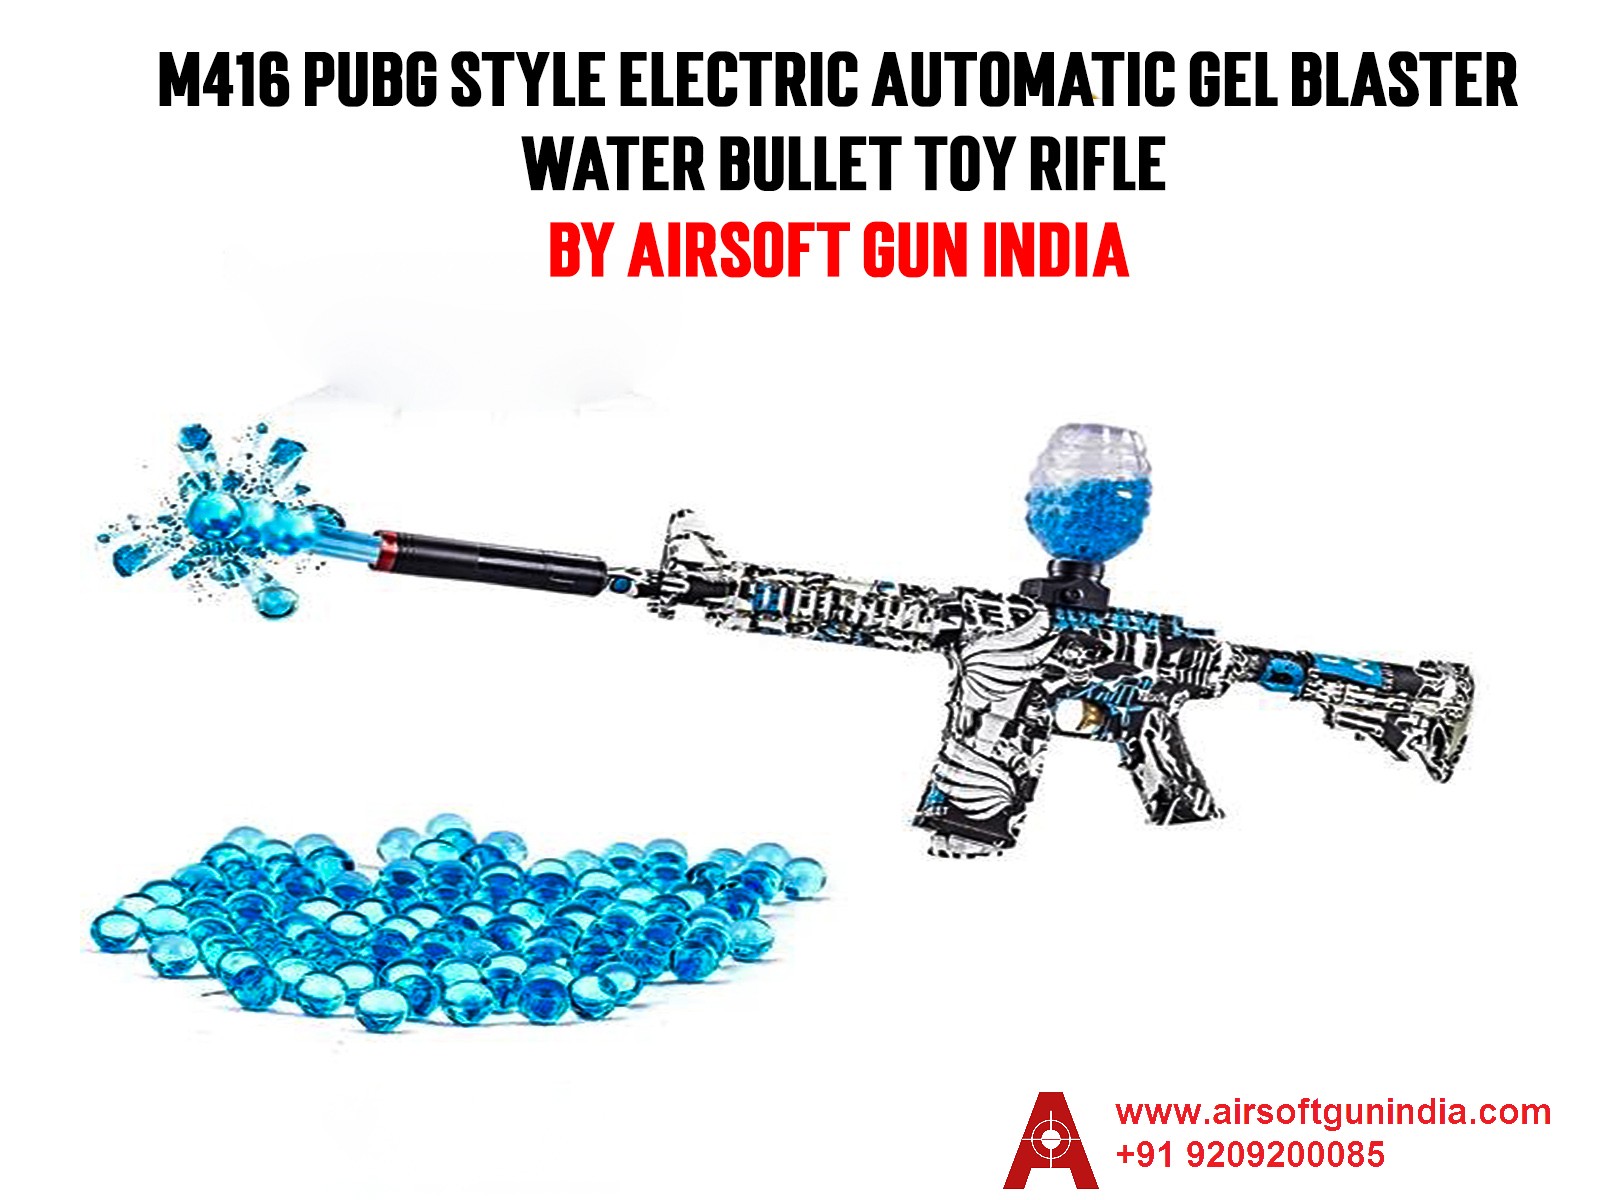 M416 PUBG Style Electric Automatic Gel Blaster Water Bullet Toy Rifle - Airsoft Gun India